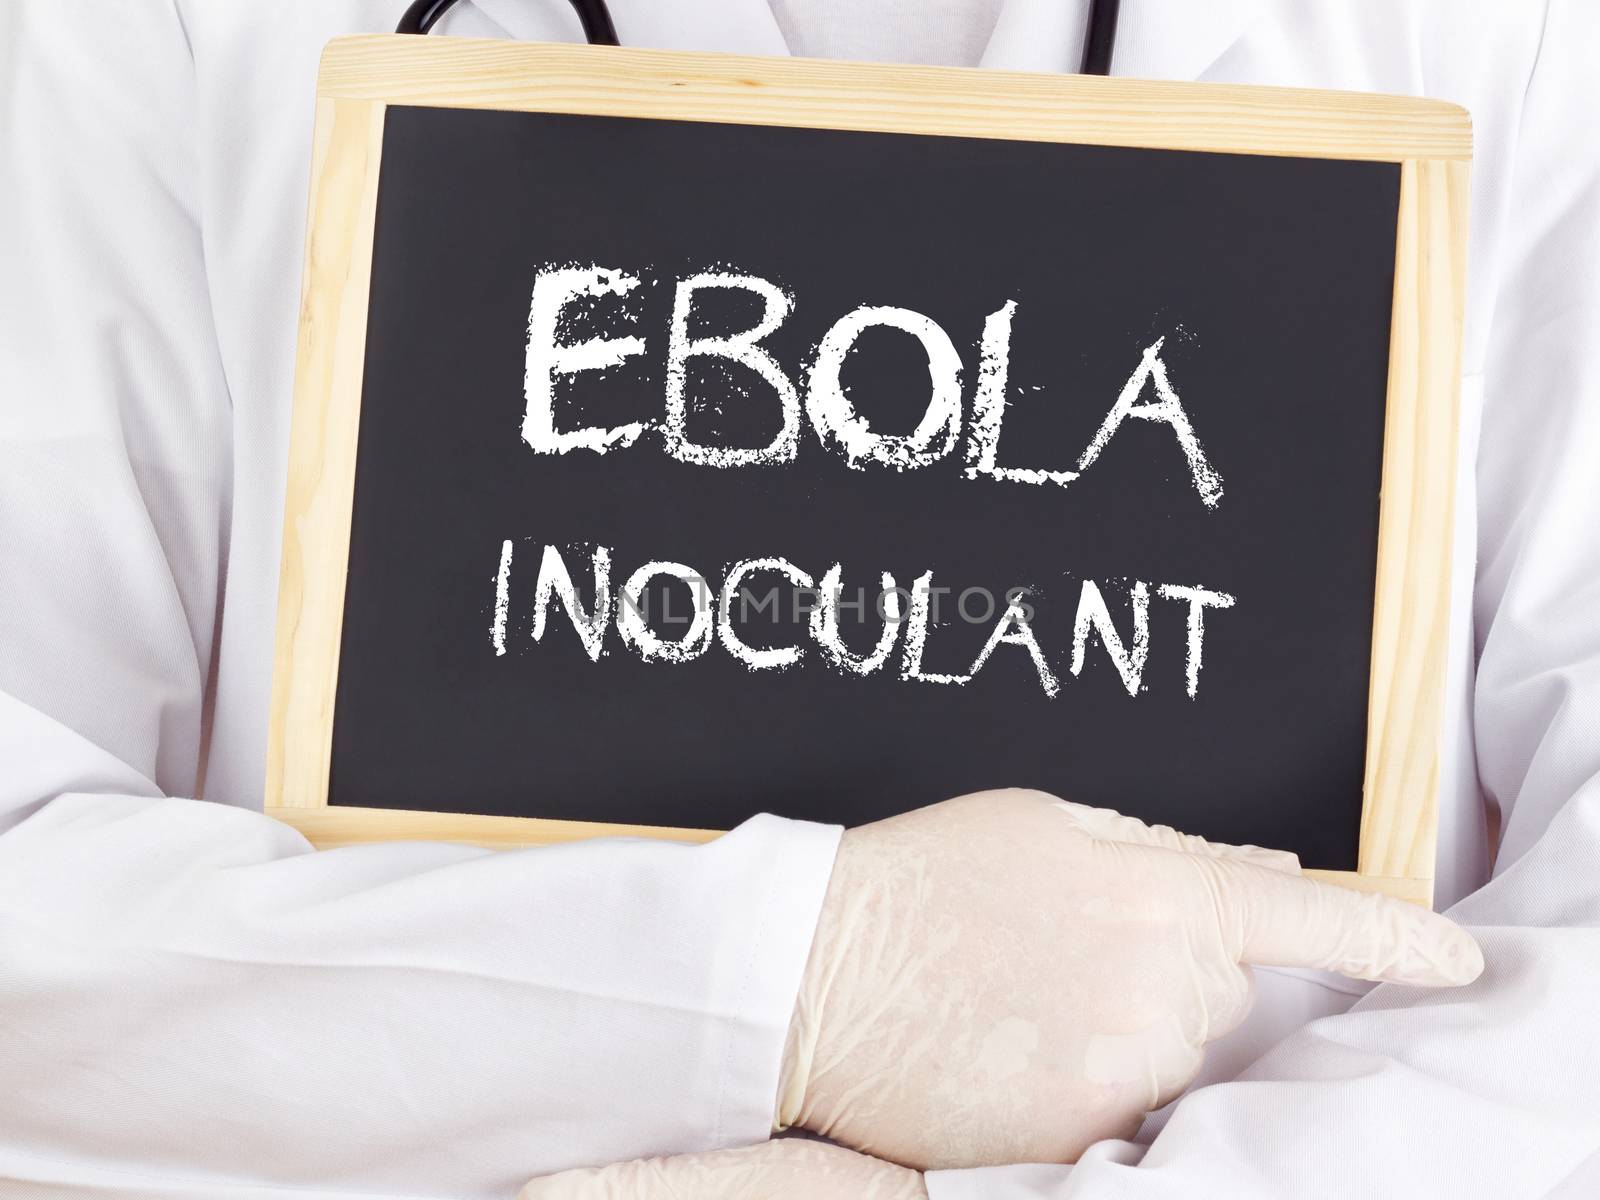 Doctor shows information: Ebola inoculant by gwolters